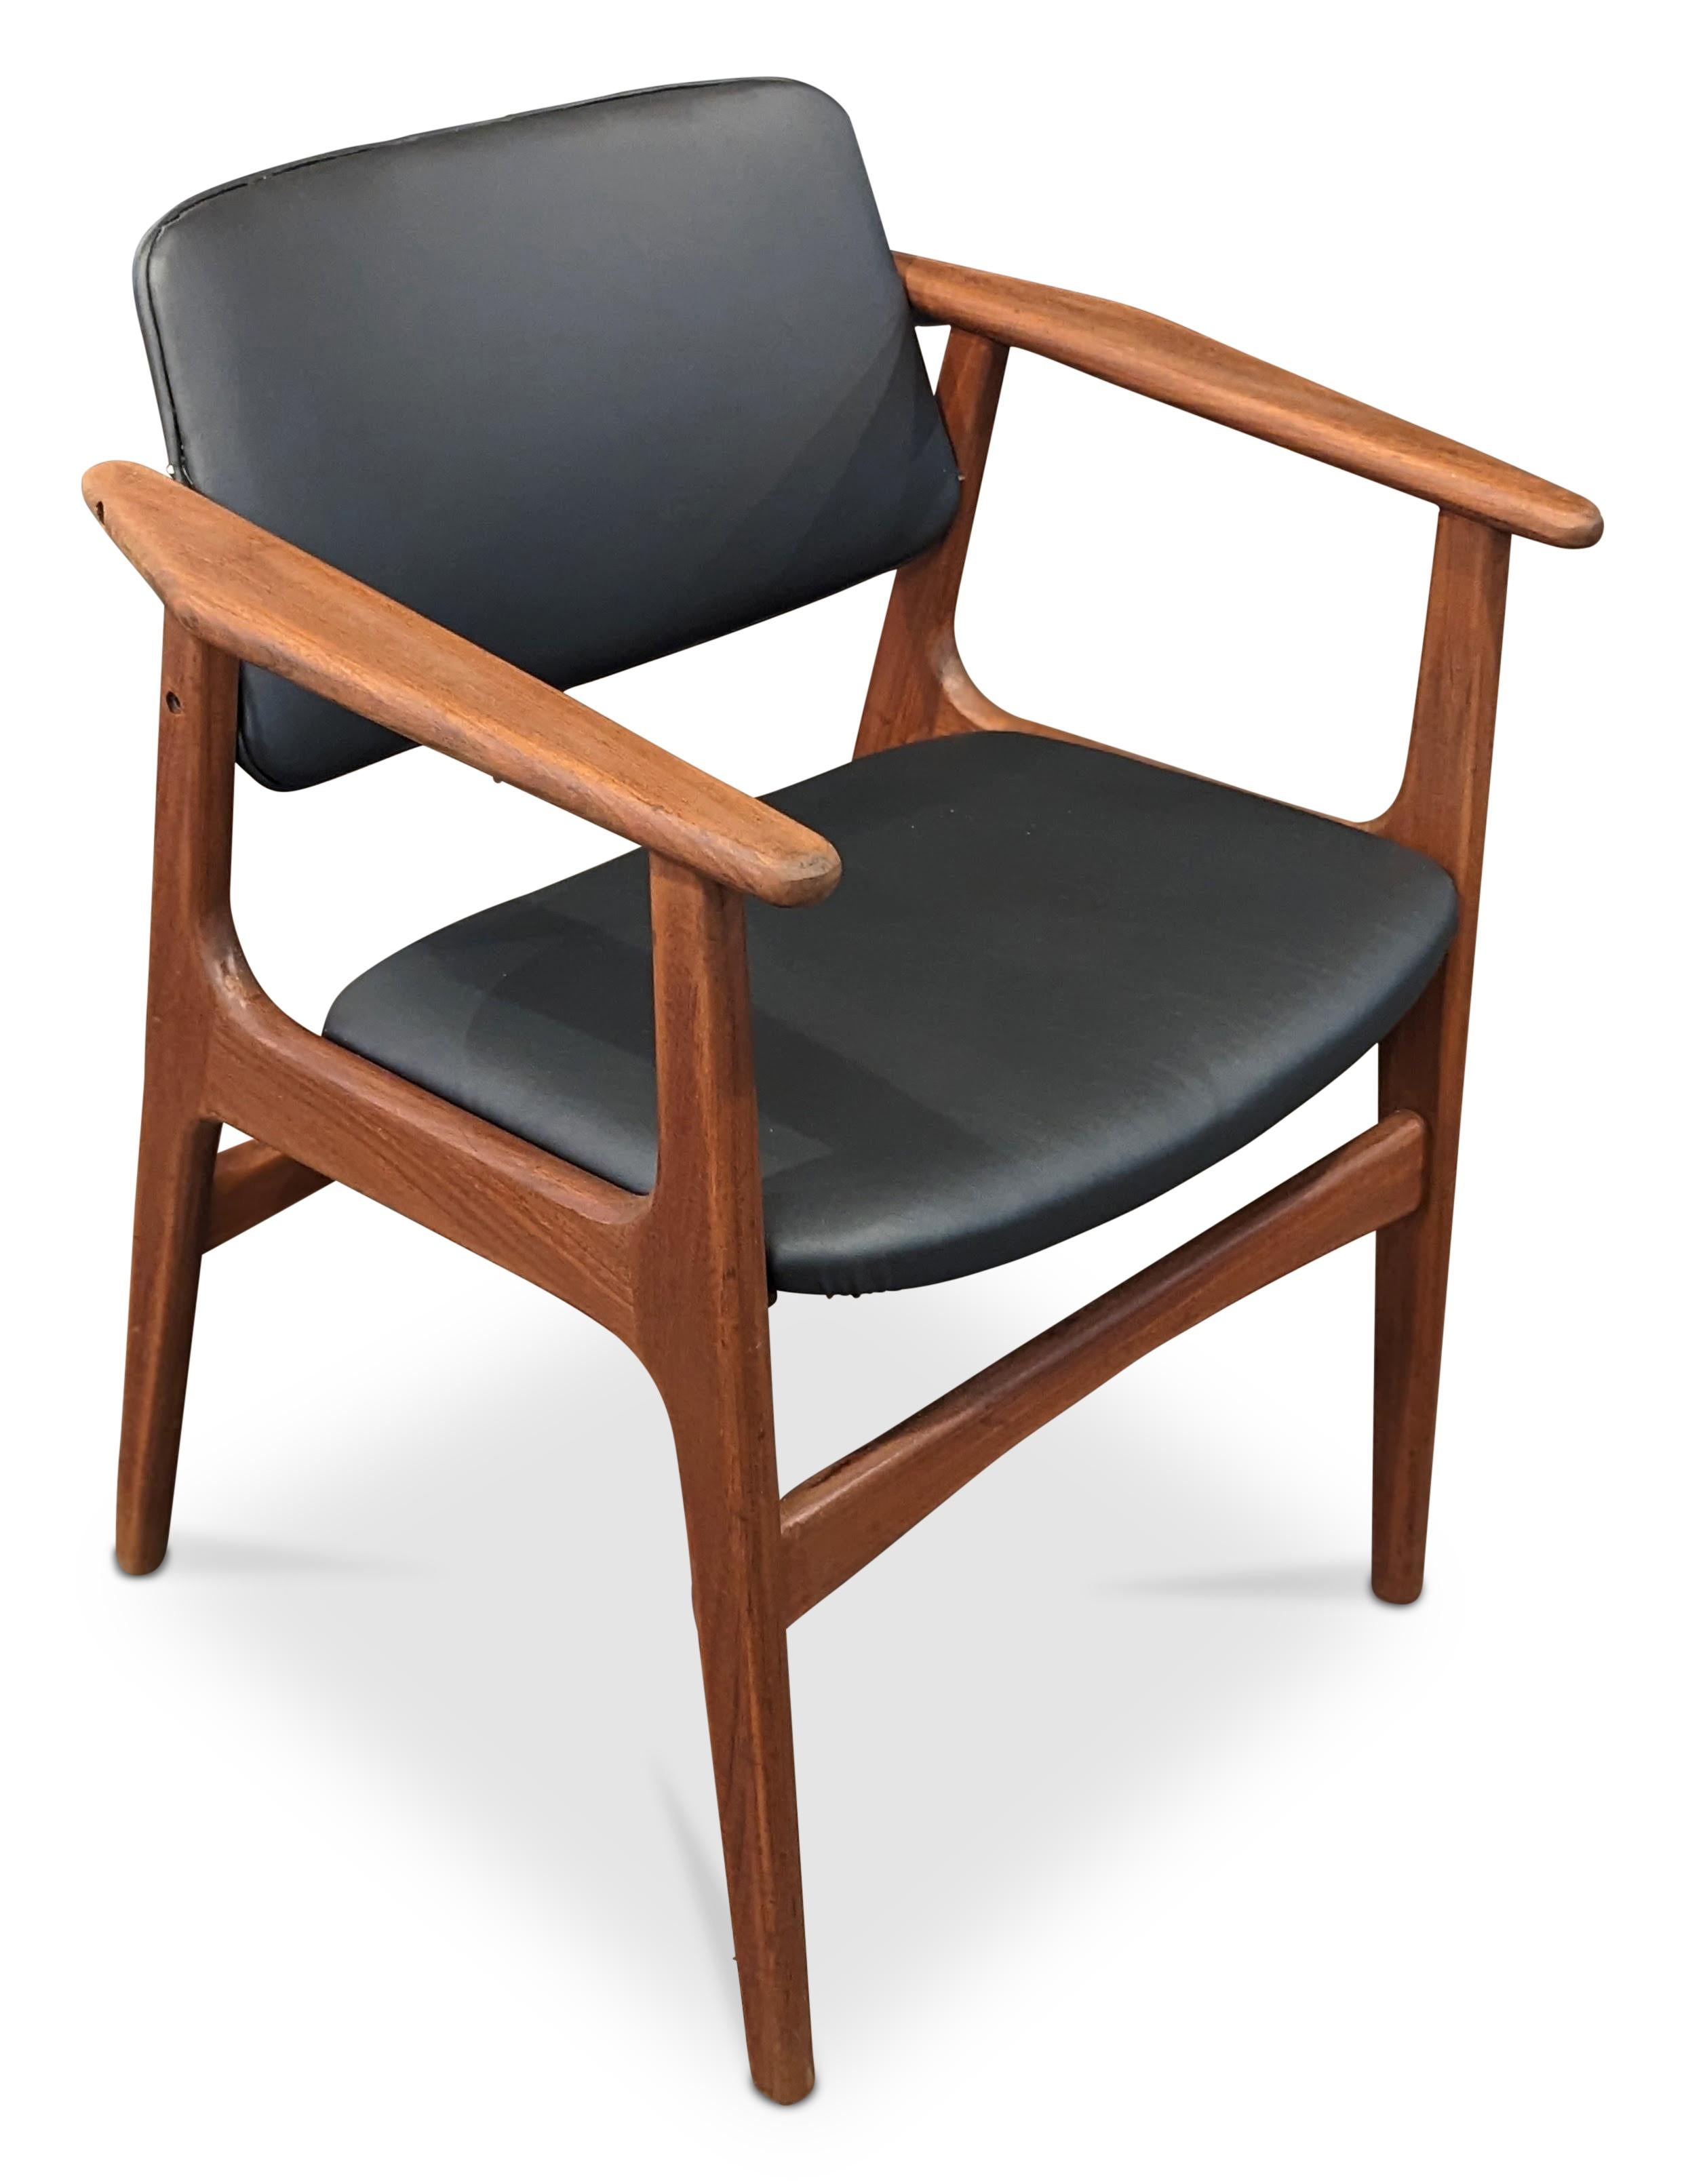 4 Arne Vodder Teak Arm Chairs - 072312 Vintage Danish Mid Century In Good Condition In Brooklyn, NY